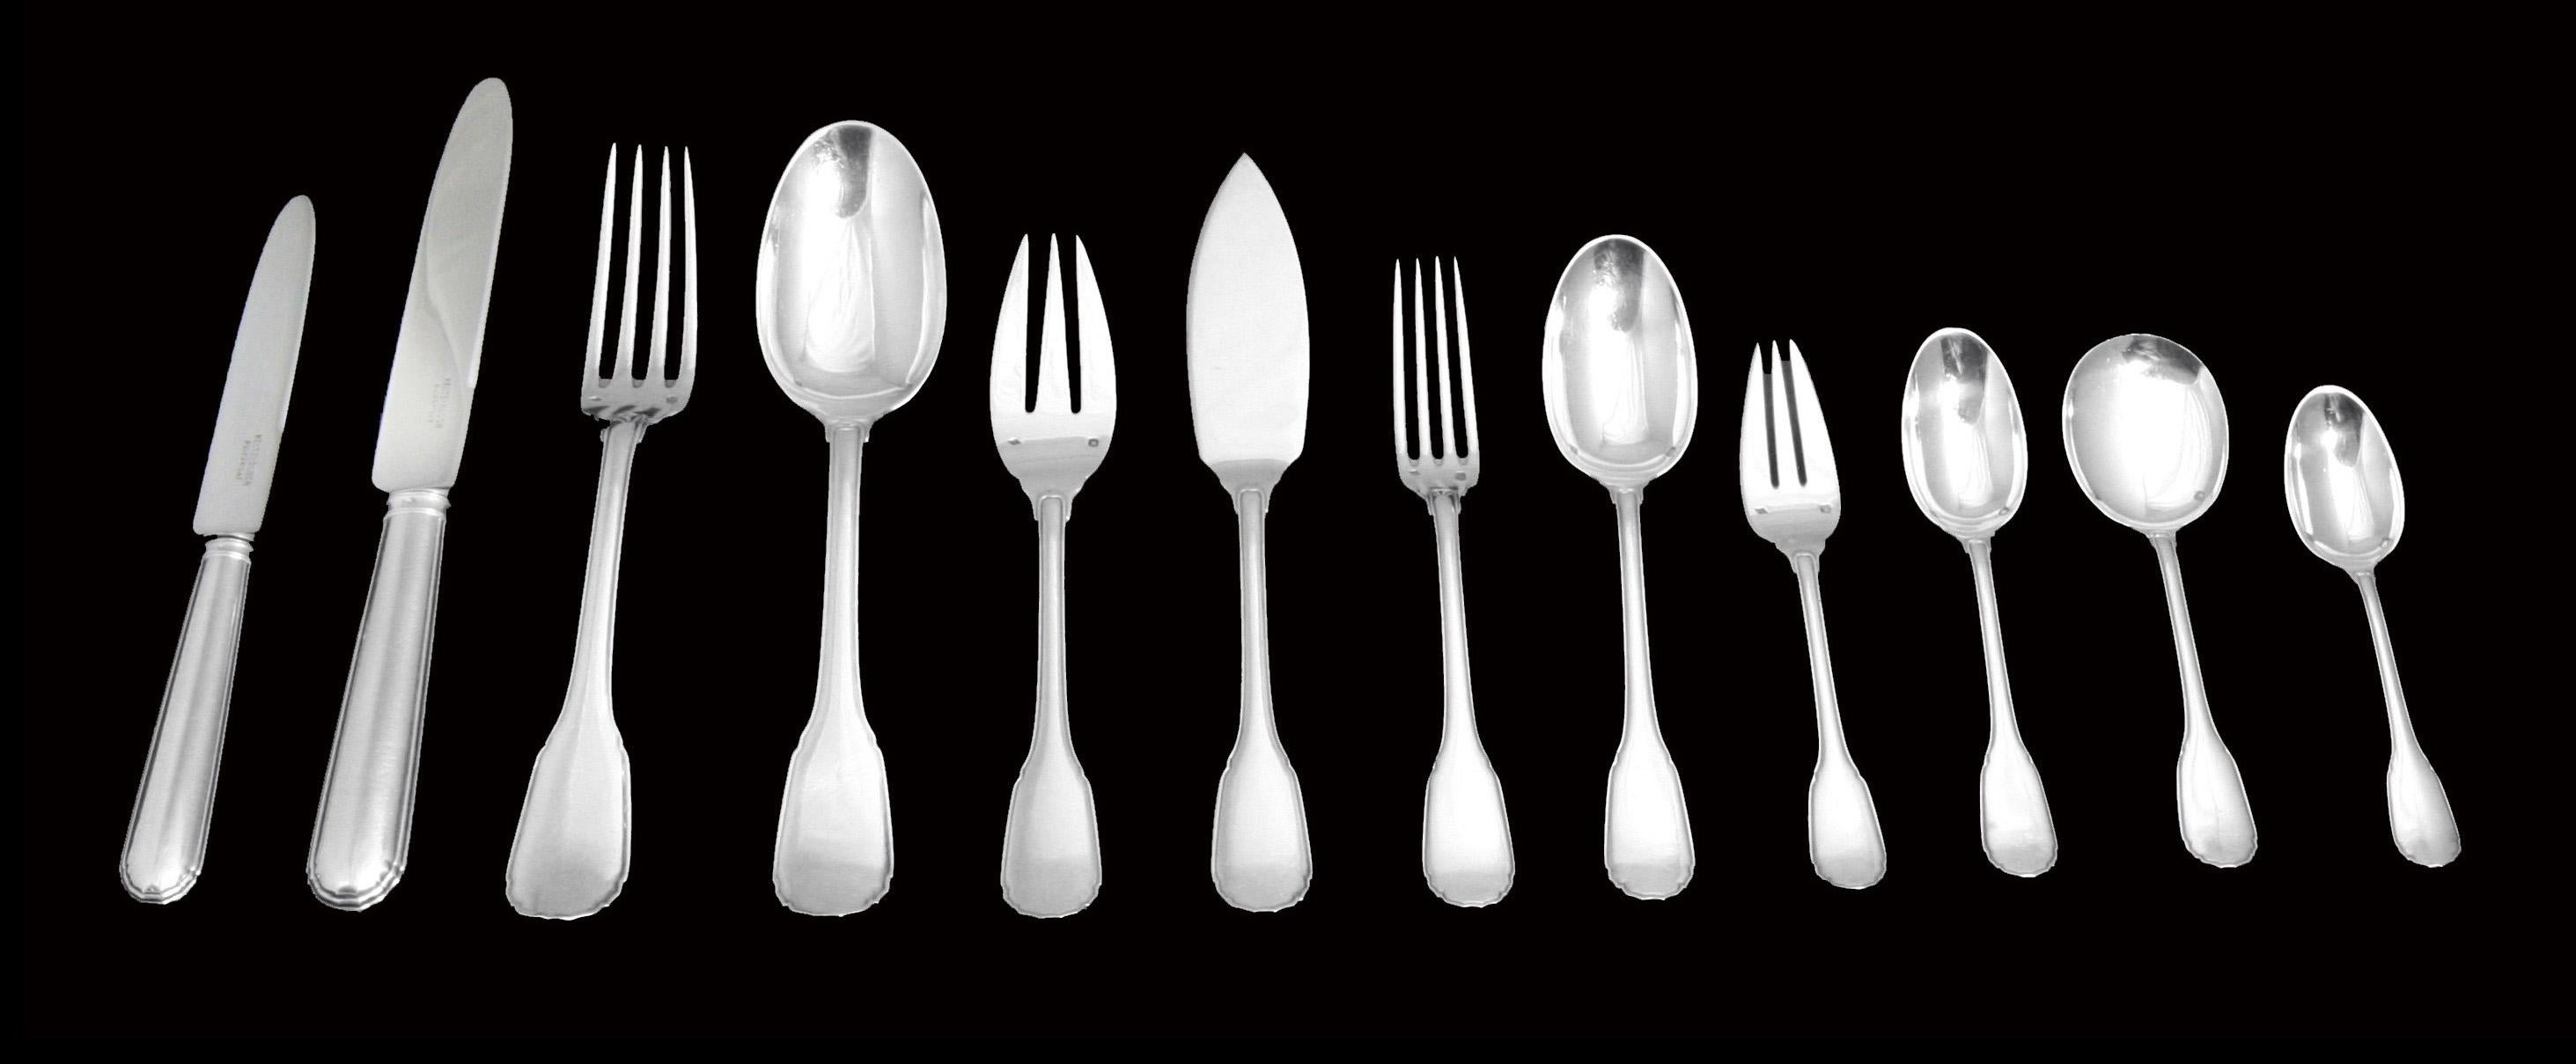 Direct from Paris, A Superb 169pc.  19th Century 950 Sterling Silver Flatware Set with 19 Serving Pieces (Noailles Pattern) by the World's Premier French Silversmith 